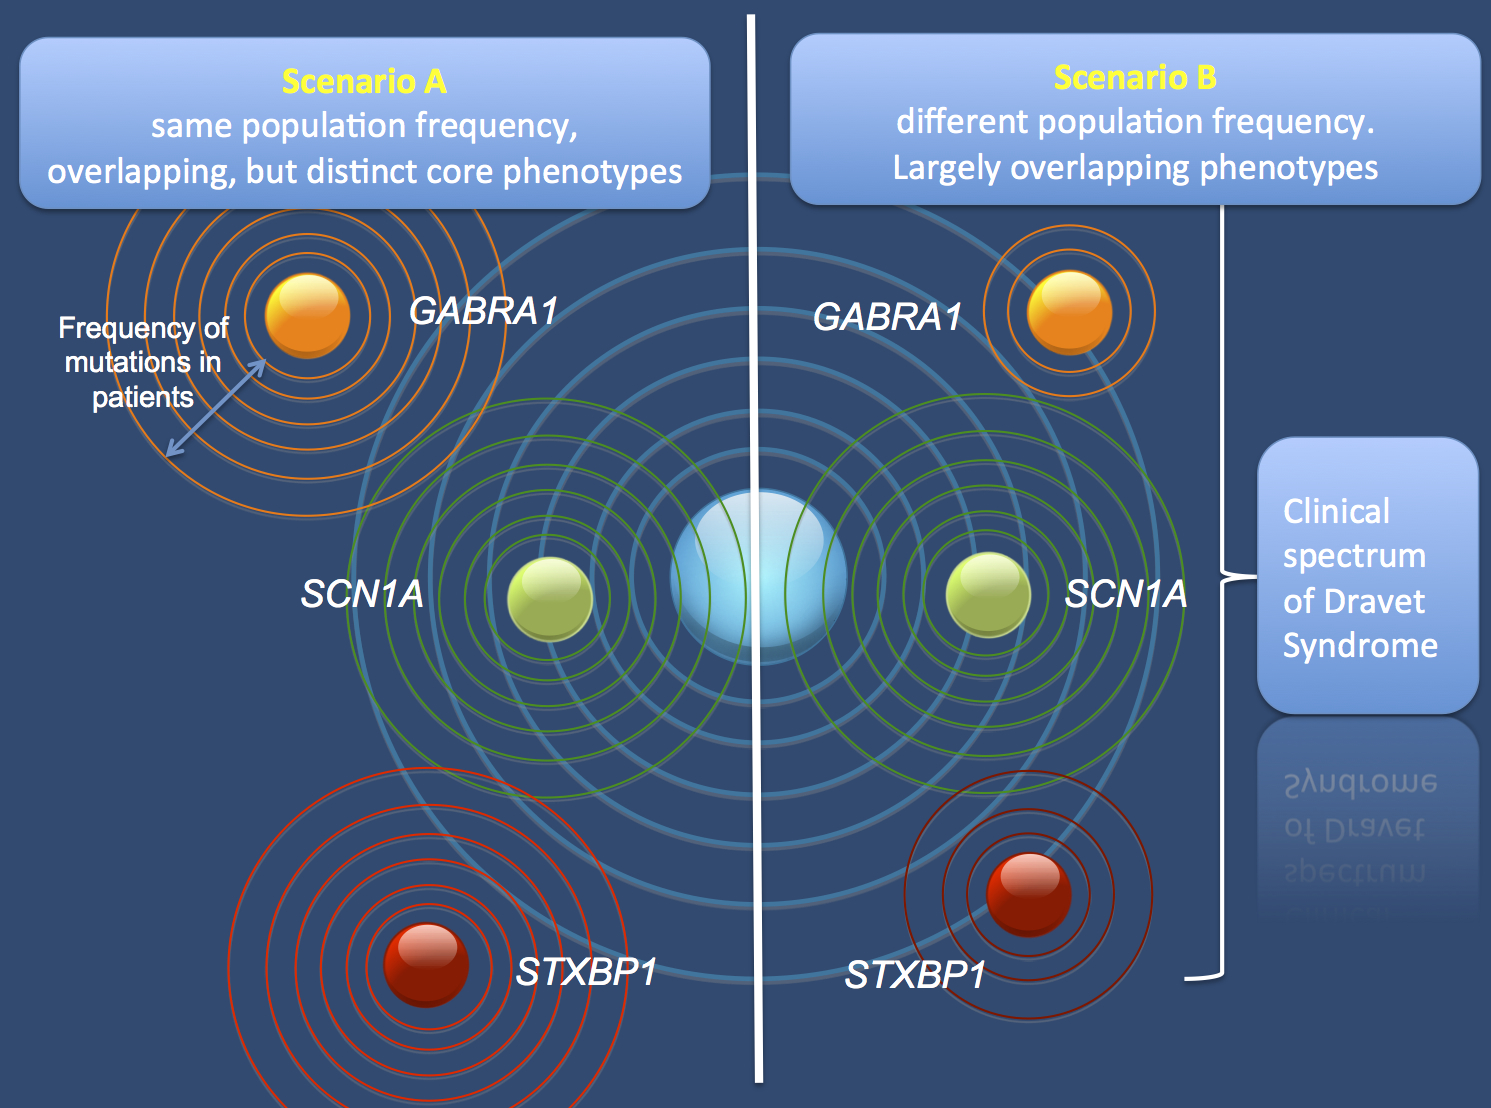 The two scenarios on how mutations in SCN1A, GABRA1, and STXBP1 may result in Dravet Syndrome. According to Scenario A, all mutations have an equal probability of occurring, but the phenotypic range is different. The “core phenotype” would describe the most characteristic phenotype with these mutations, but may be different for all three genes. According to Scenario B, the phenotypic range is similar, but the mutations have different probabilities of occurring. Scenario B would stipulate that all phenotypic differences suggested so far for these genes might be the results of recruitment bias. According to the recent literature, Scenario A is favored over Scenario B. 